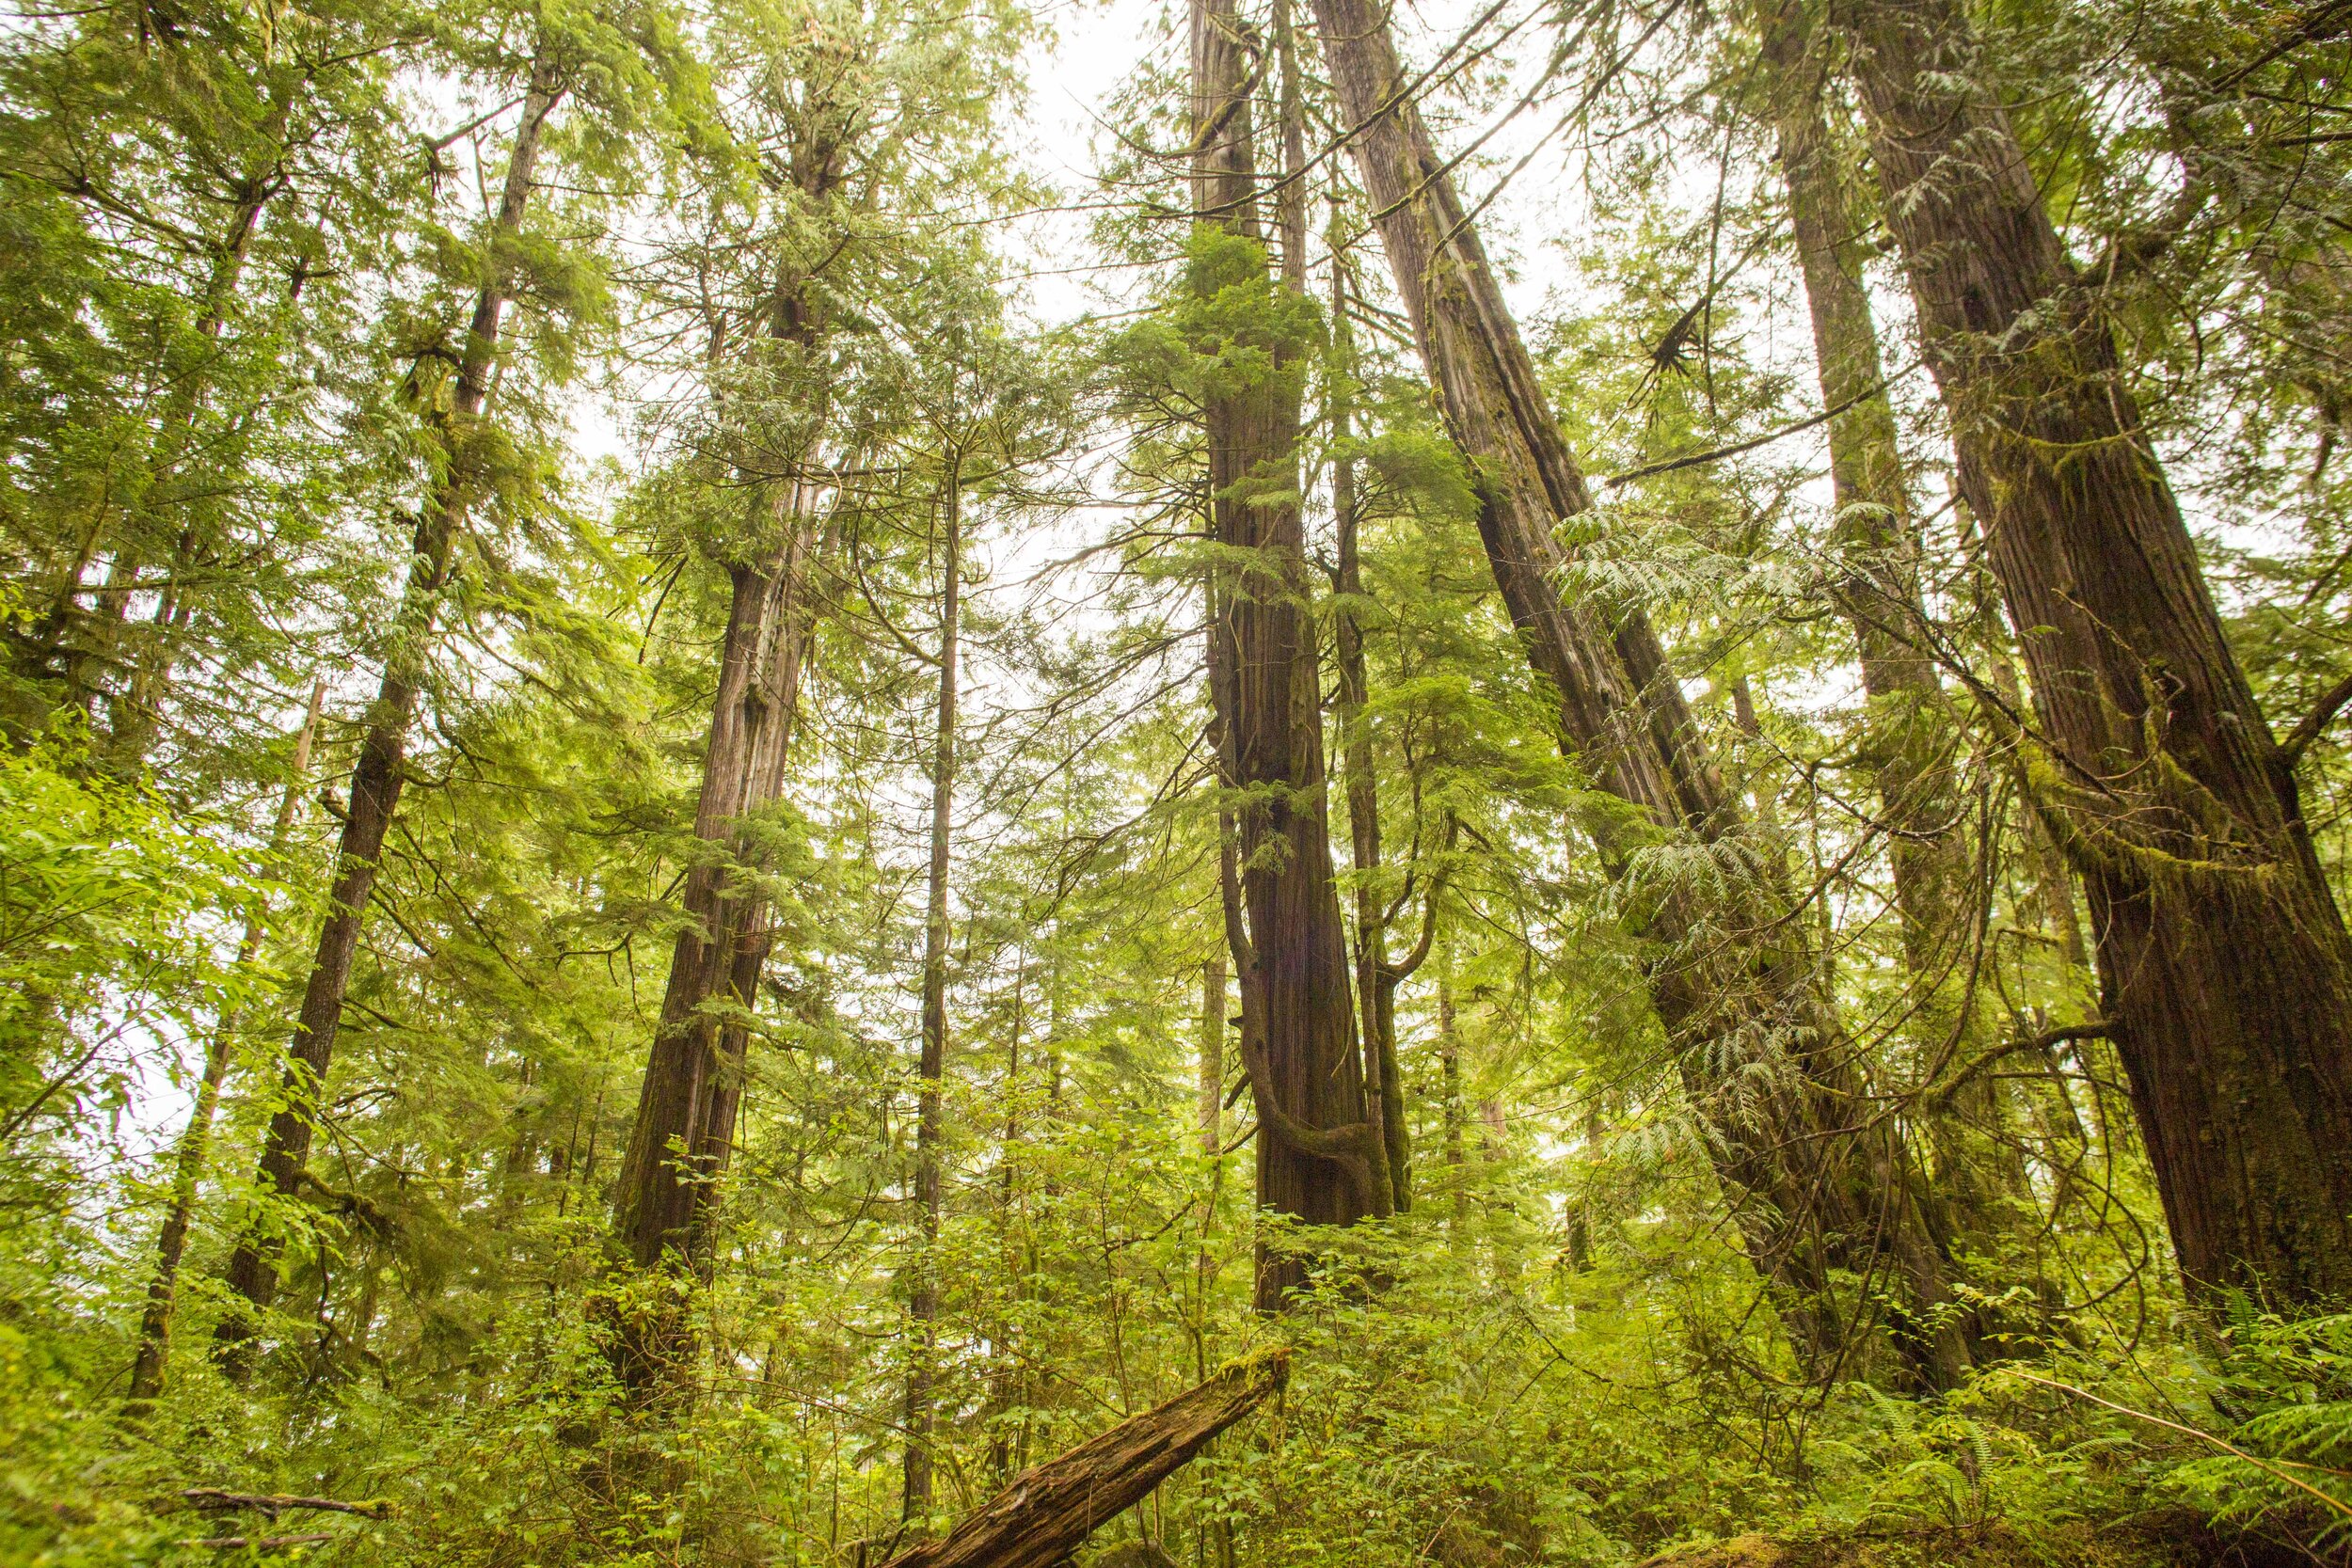  Old growth western red cedar rainforest on Flores Island. Ahousaht First Nation territory 